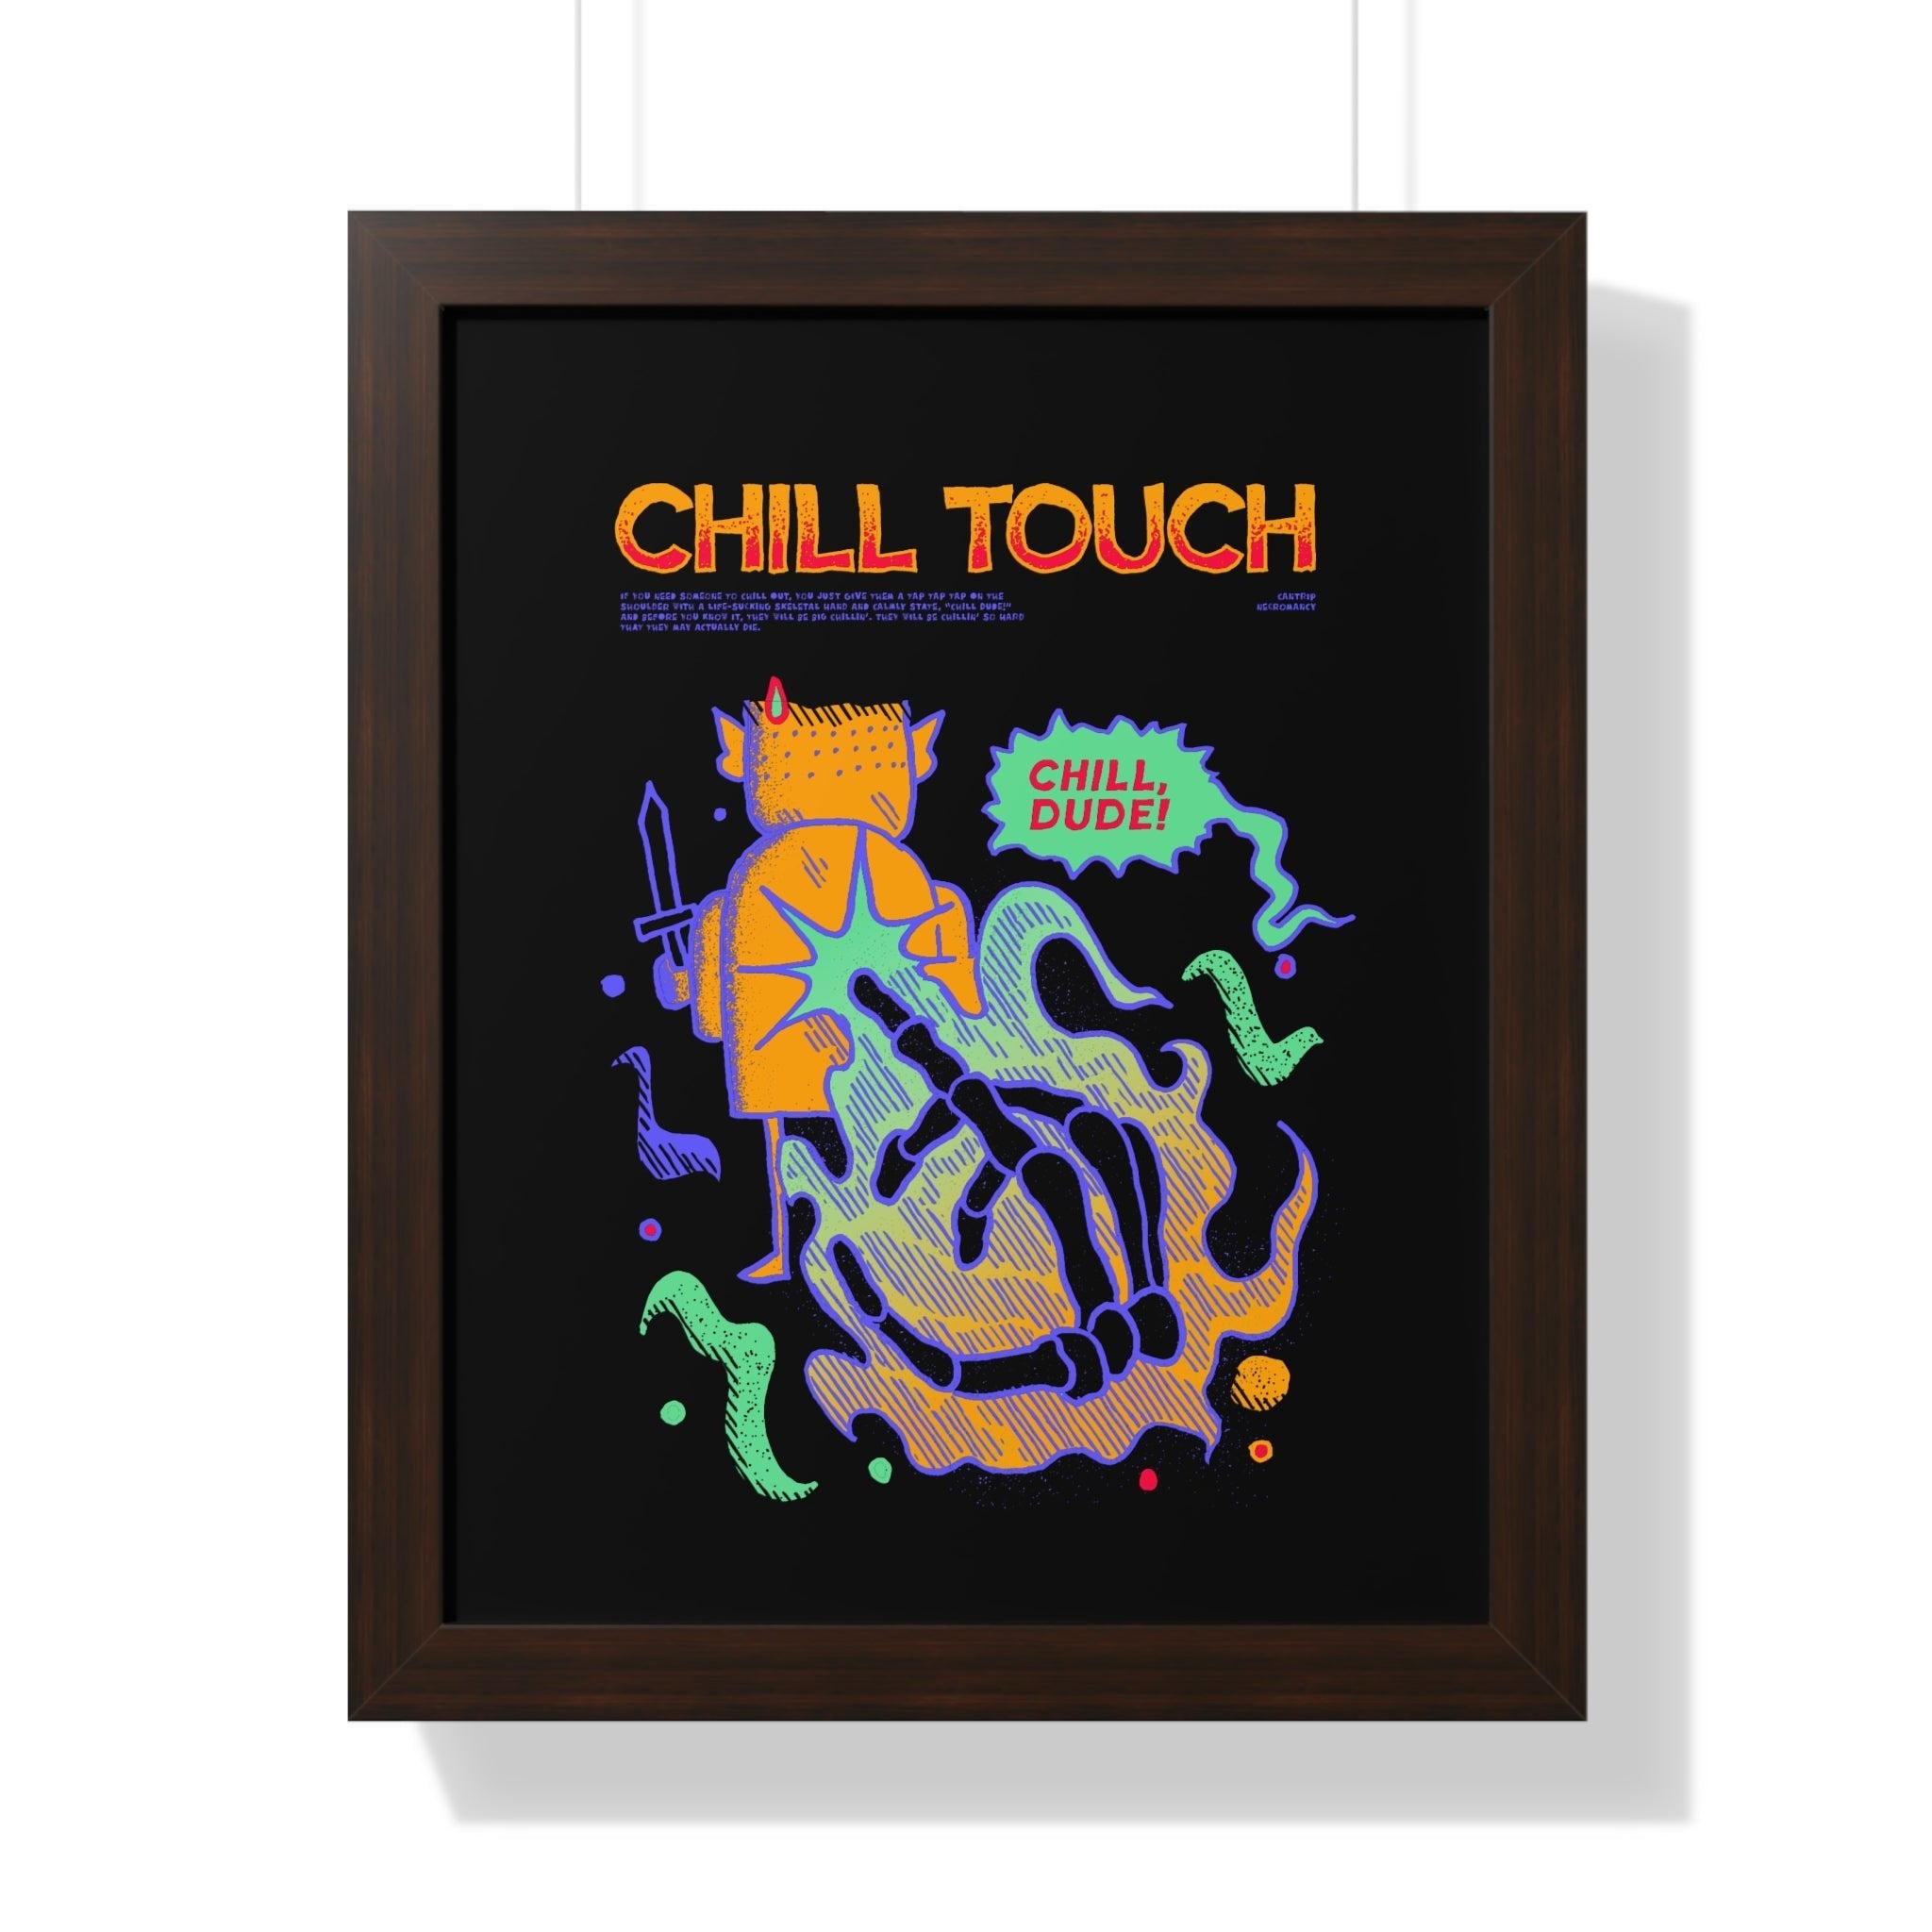 Chill Touch | Framed Poster - Framed Poster - Ace of Gnomes - 22787448500329377979